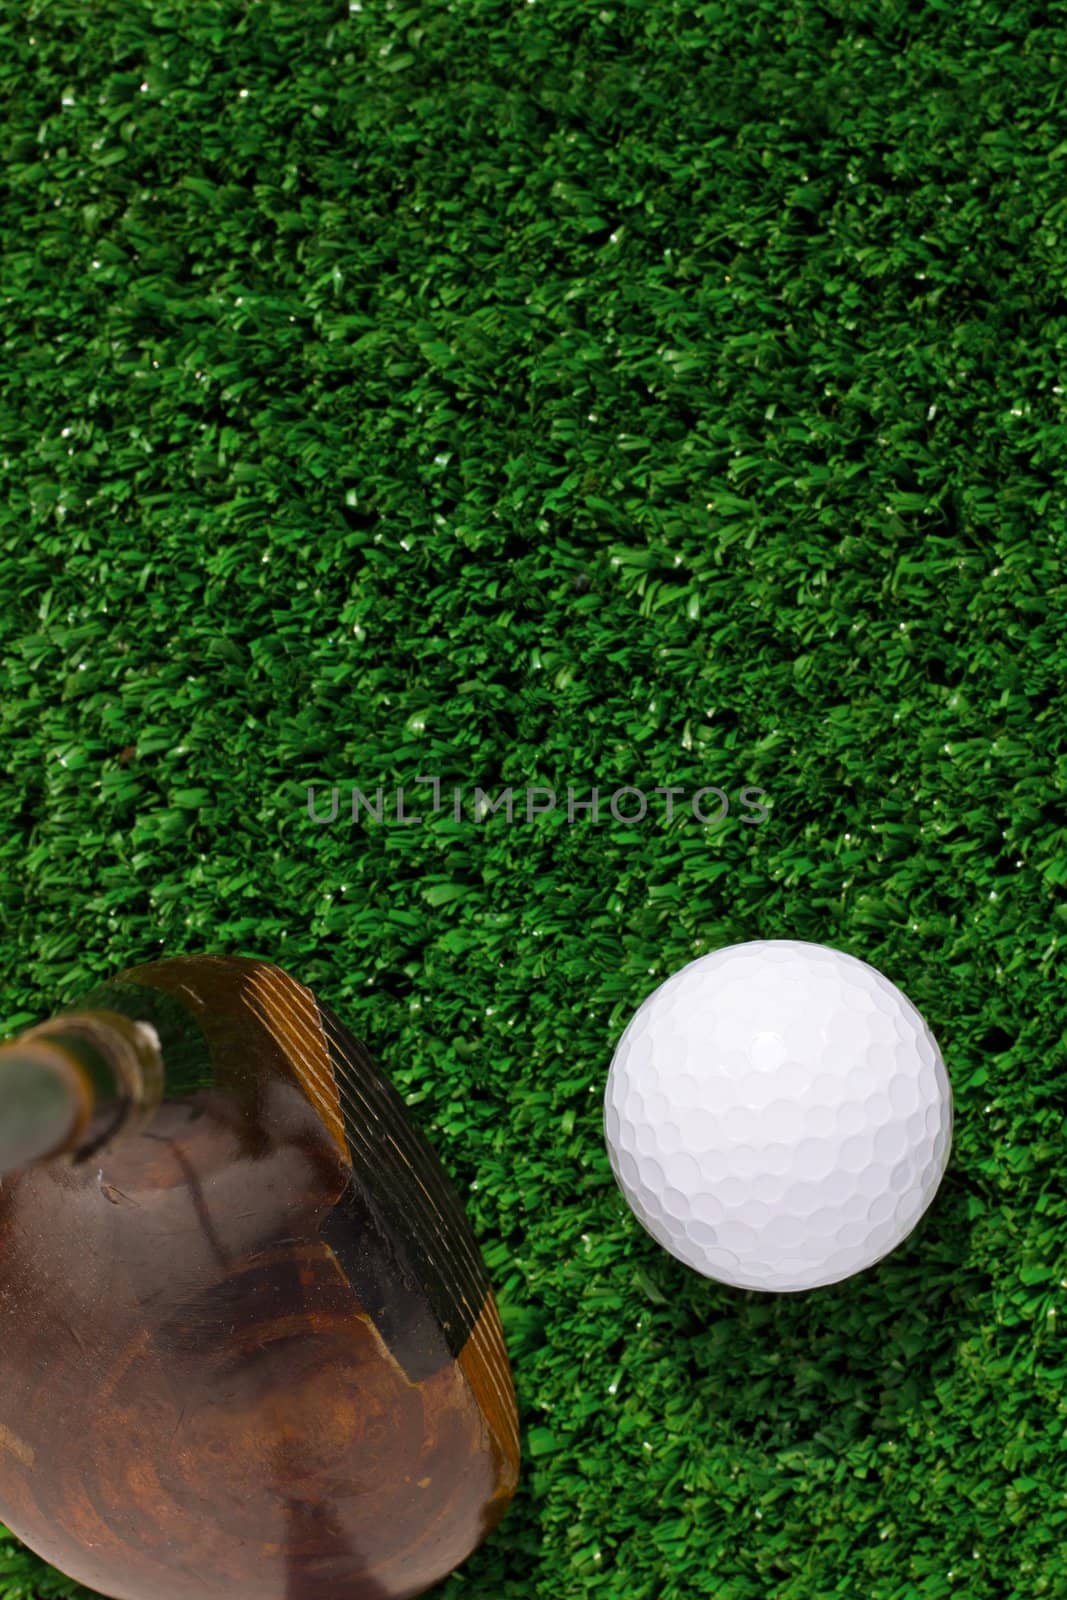 Golf ball and driver on green grass by ponsulak